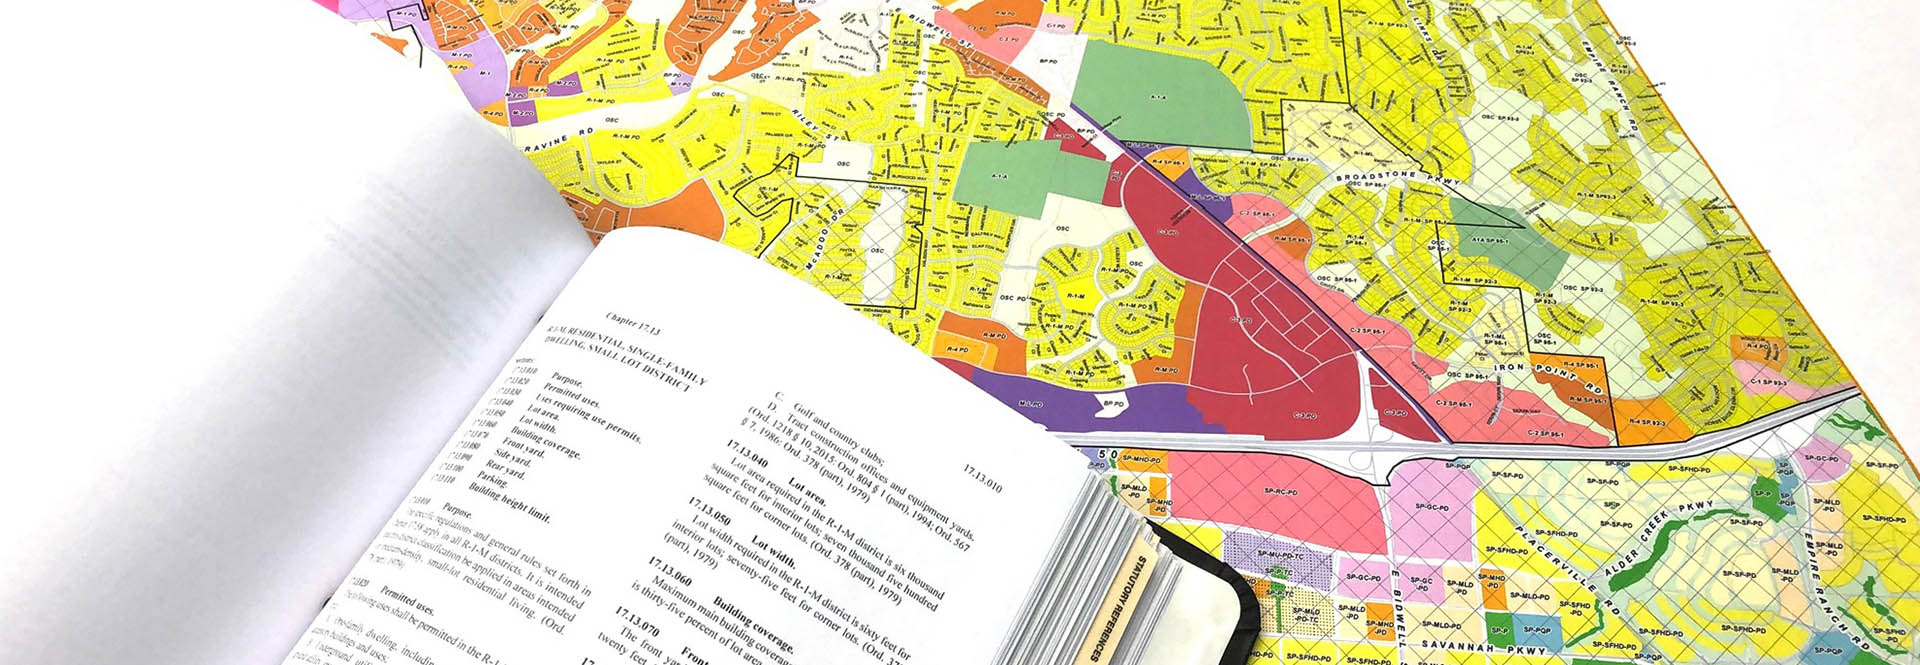 zoning update banner photo of multicolored zoning map and code book on top of the map